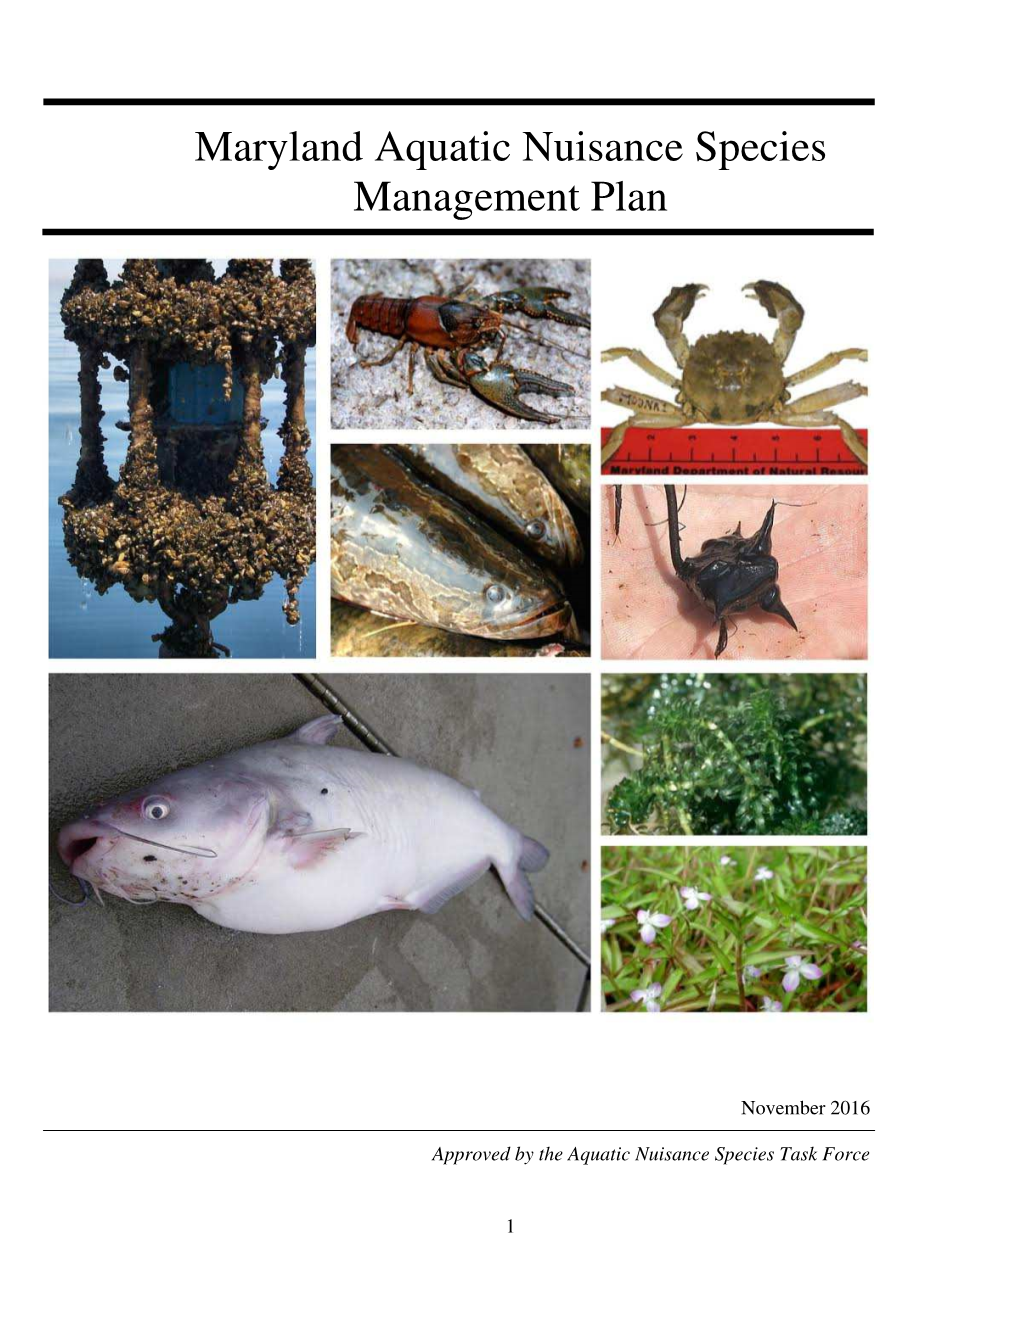 Aquatic Nuisance Species Plan, Established Species Or Species Groups for Which There Is a High Probability of Negative Economic And/Or Ecological Impact